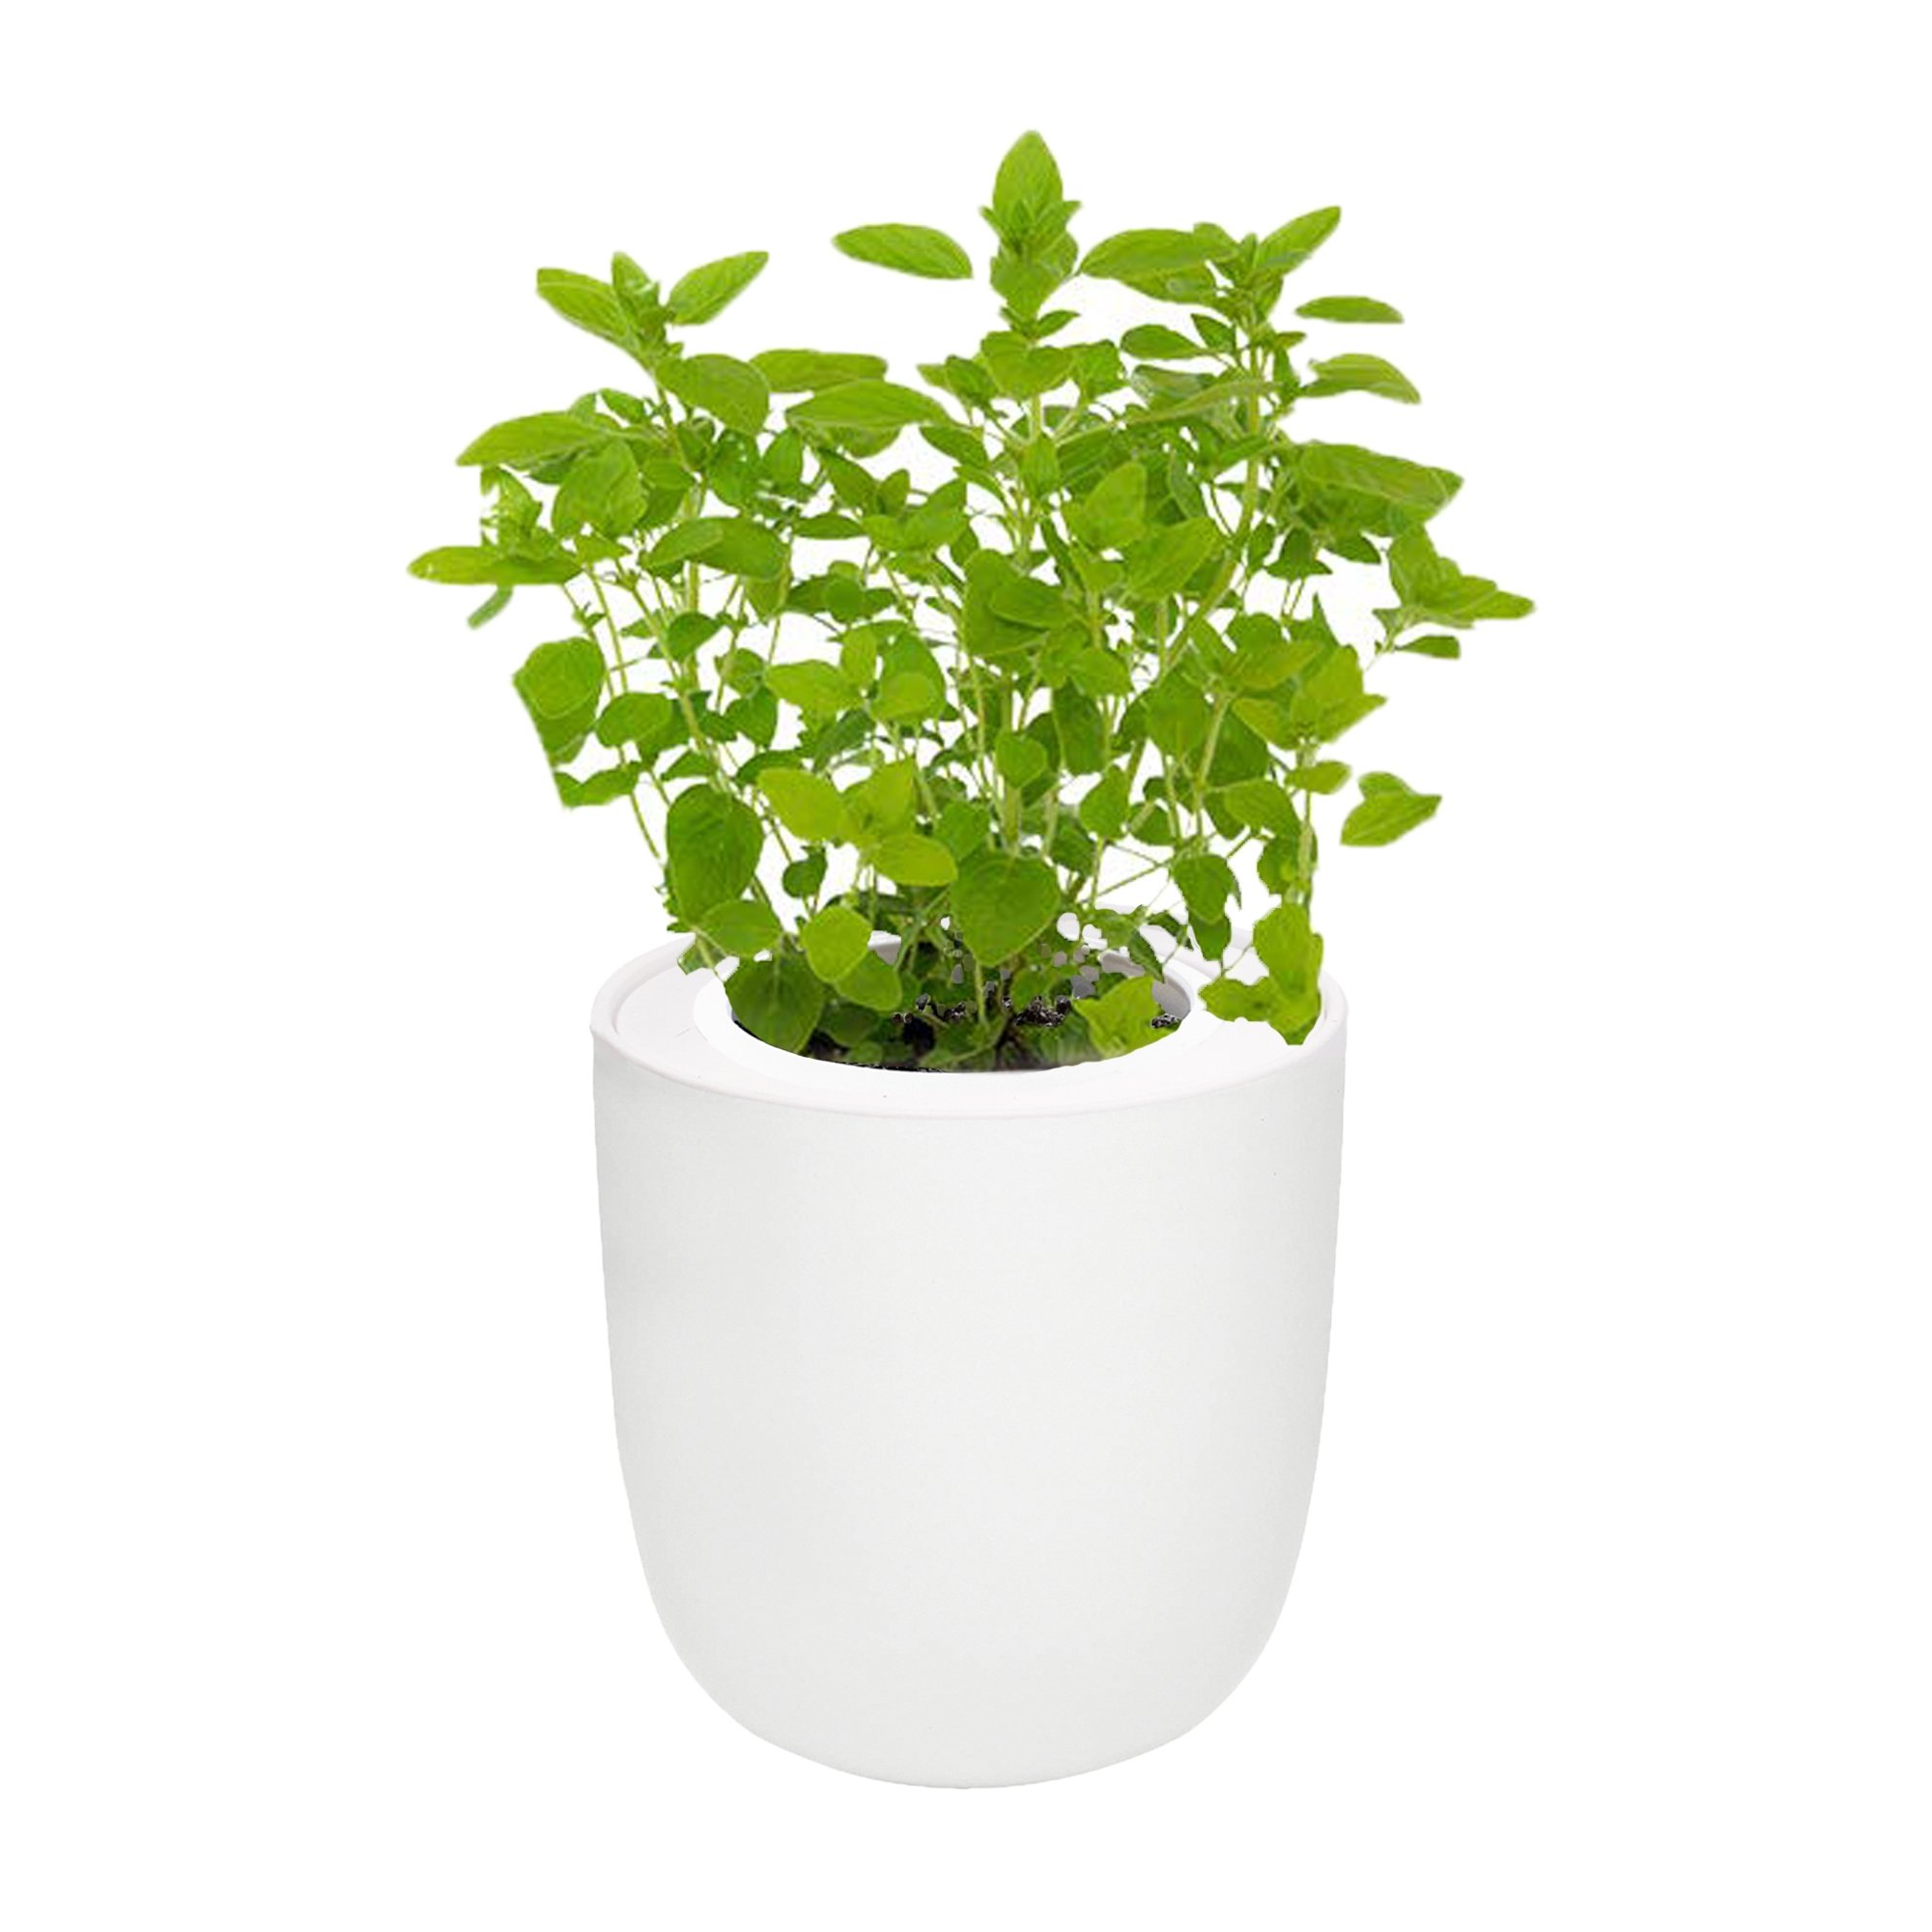 Marjoram White Ceramic Pot Hydroponic Growing Kit with Seeds